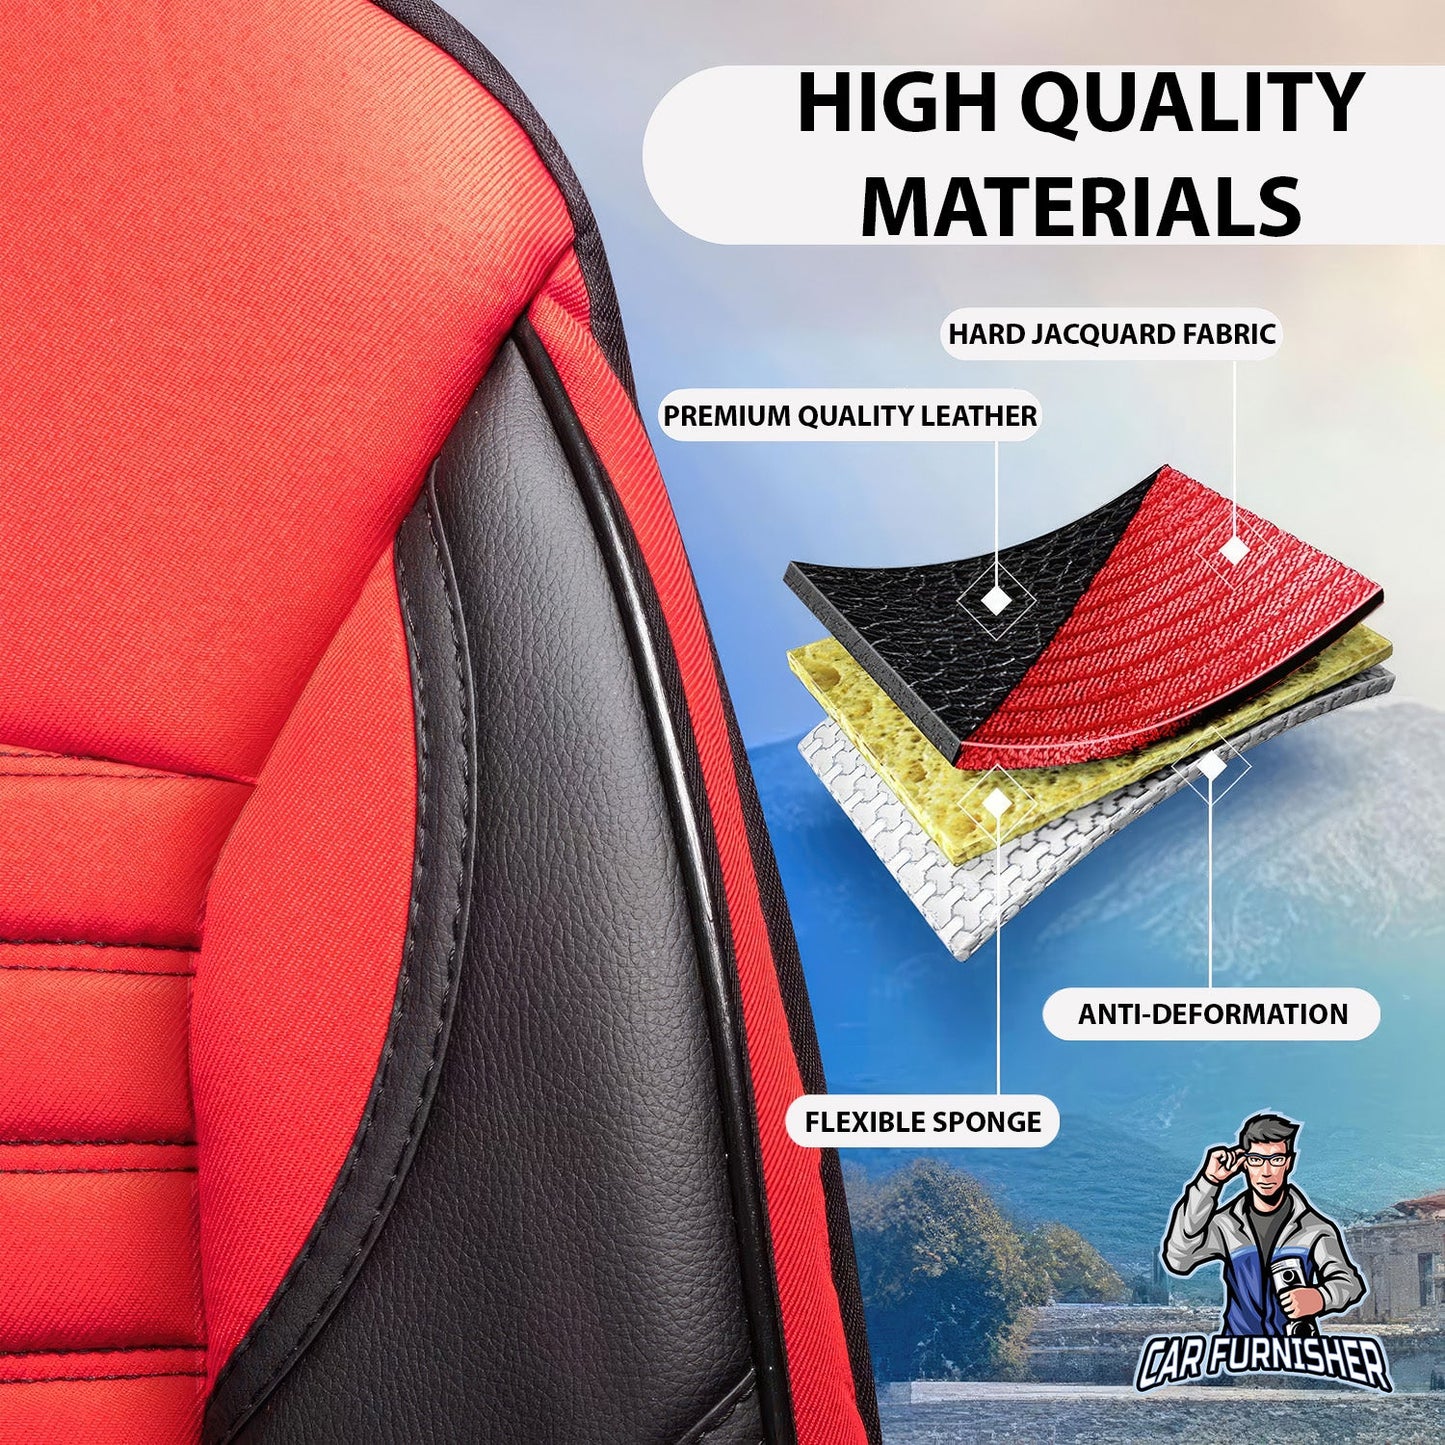 Volkswagen Jetta Seat Covers Athens Design Red 5 Seats + Headrests (Full Set) Leather & Jacquard Fabric